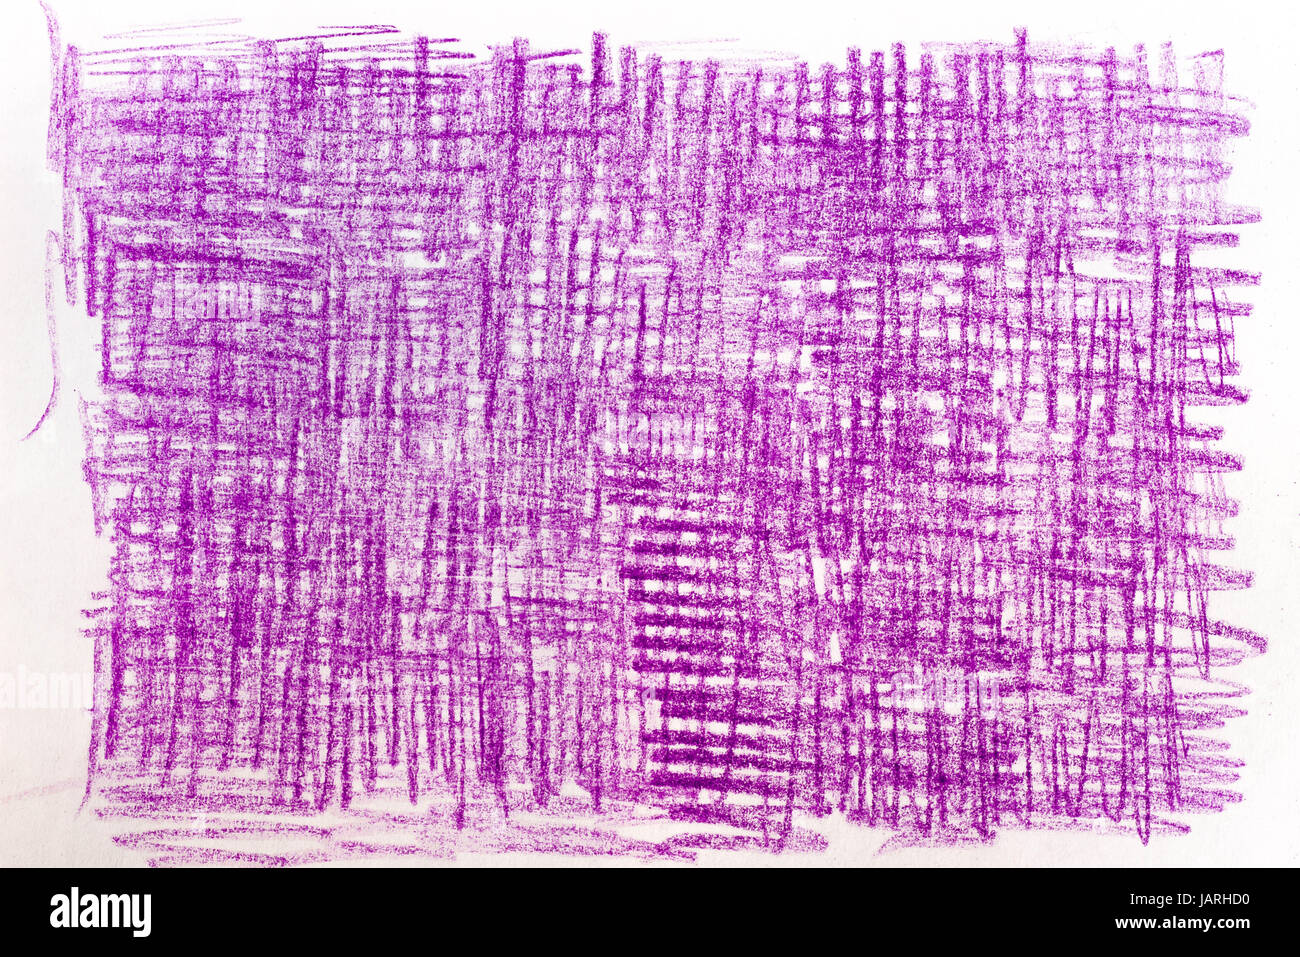 violet crayon drawings on white paper background texture Stock Photo